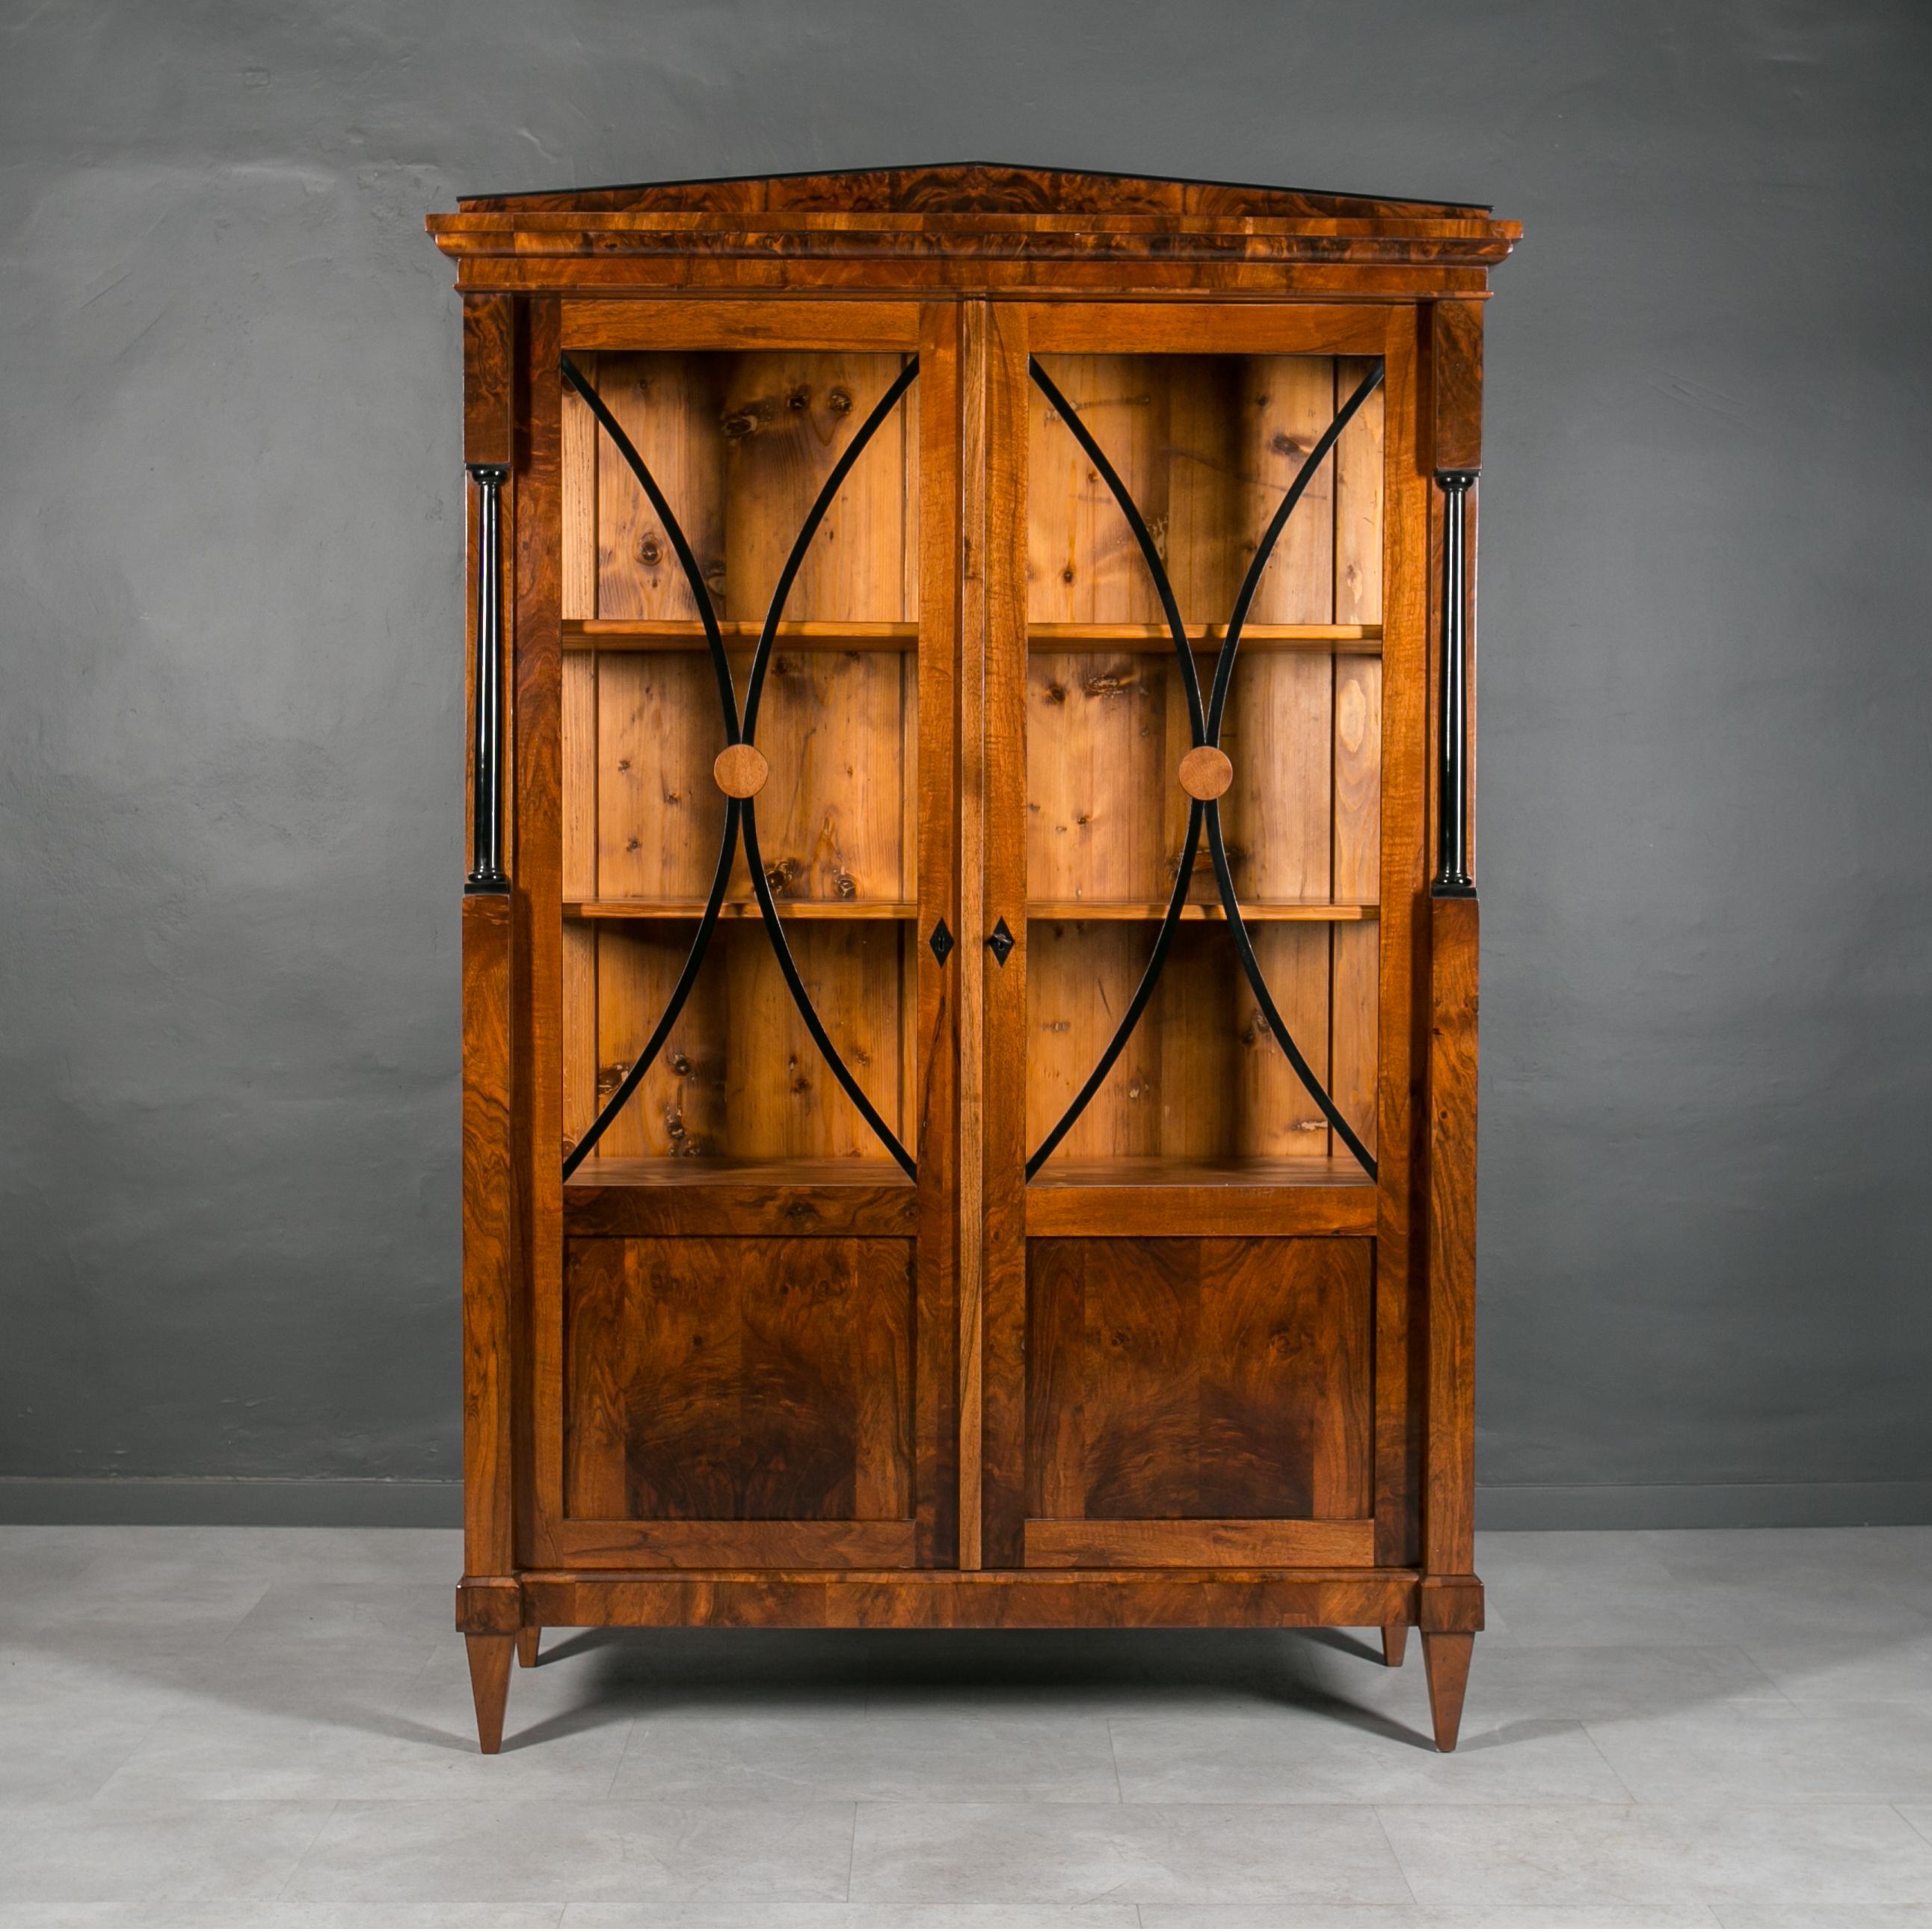 This beautiful vitrine comes from Germany and was made in 19th century (the Biedermeier period). The construction is made of coniferous wood, veneered with beautiful and rich walnut veneer. Behind the doors lockable with a key you will find 3